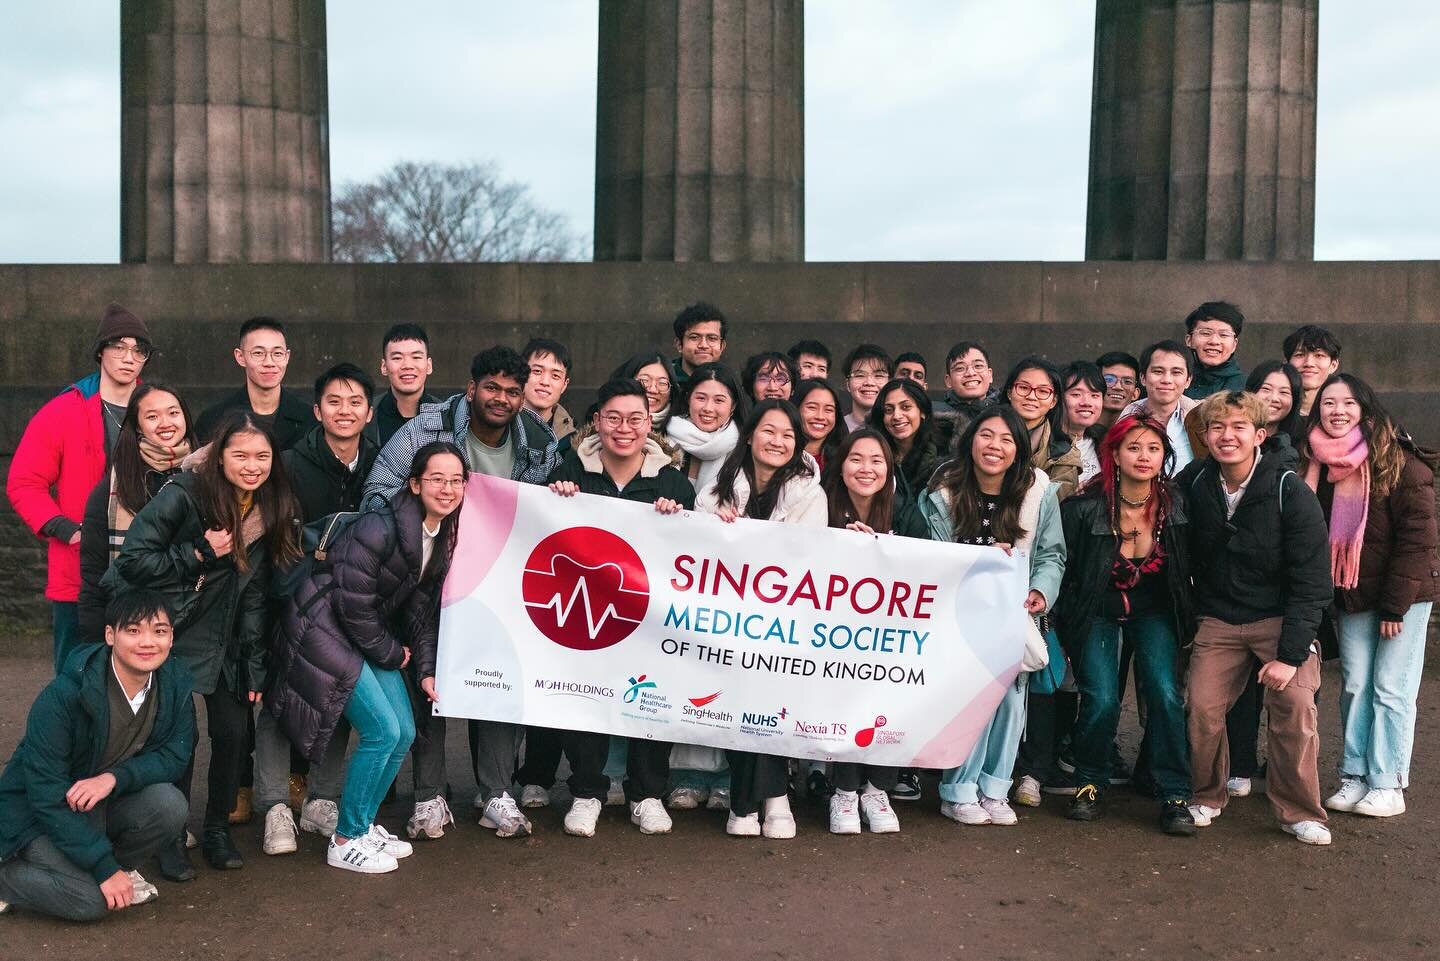 This past weekend, SMSUK members headed up to Edinburgh, Scotland for the Wider UK Trip !! 🏴󠁧󠁢󠁳󠁣󠁴󠁿🚂 We started off the morning at the picturesque Dean Village, followed by a hearty Chinese lunch at San Chuan 🥢 In the afternoon, we visited th